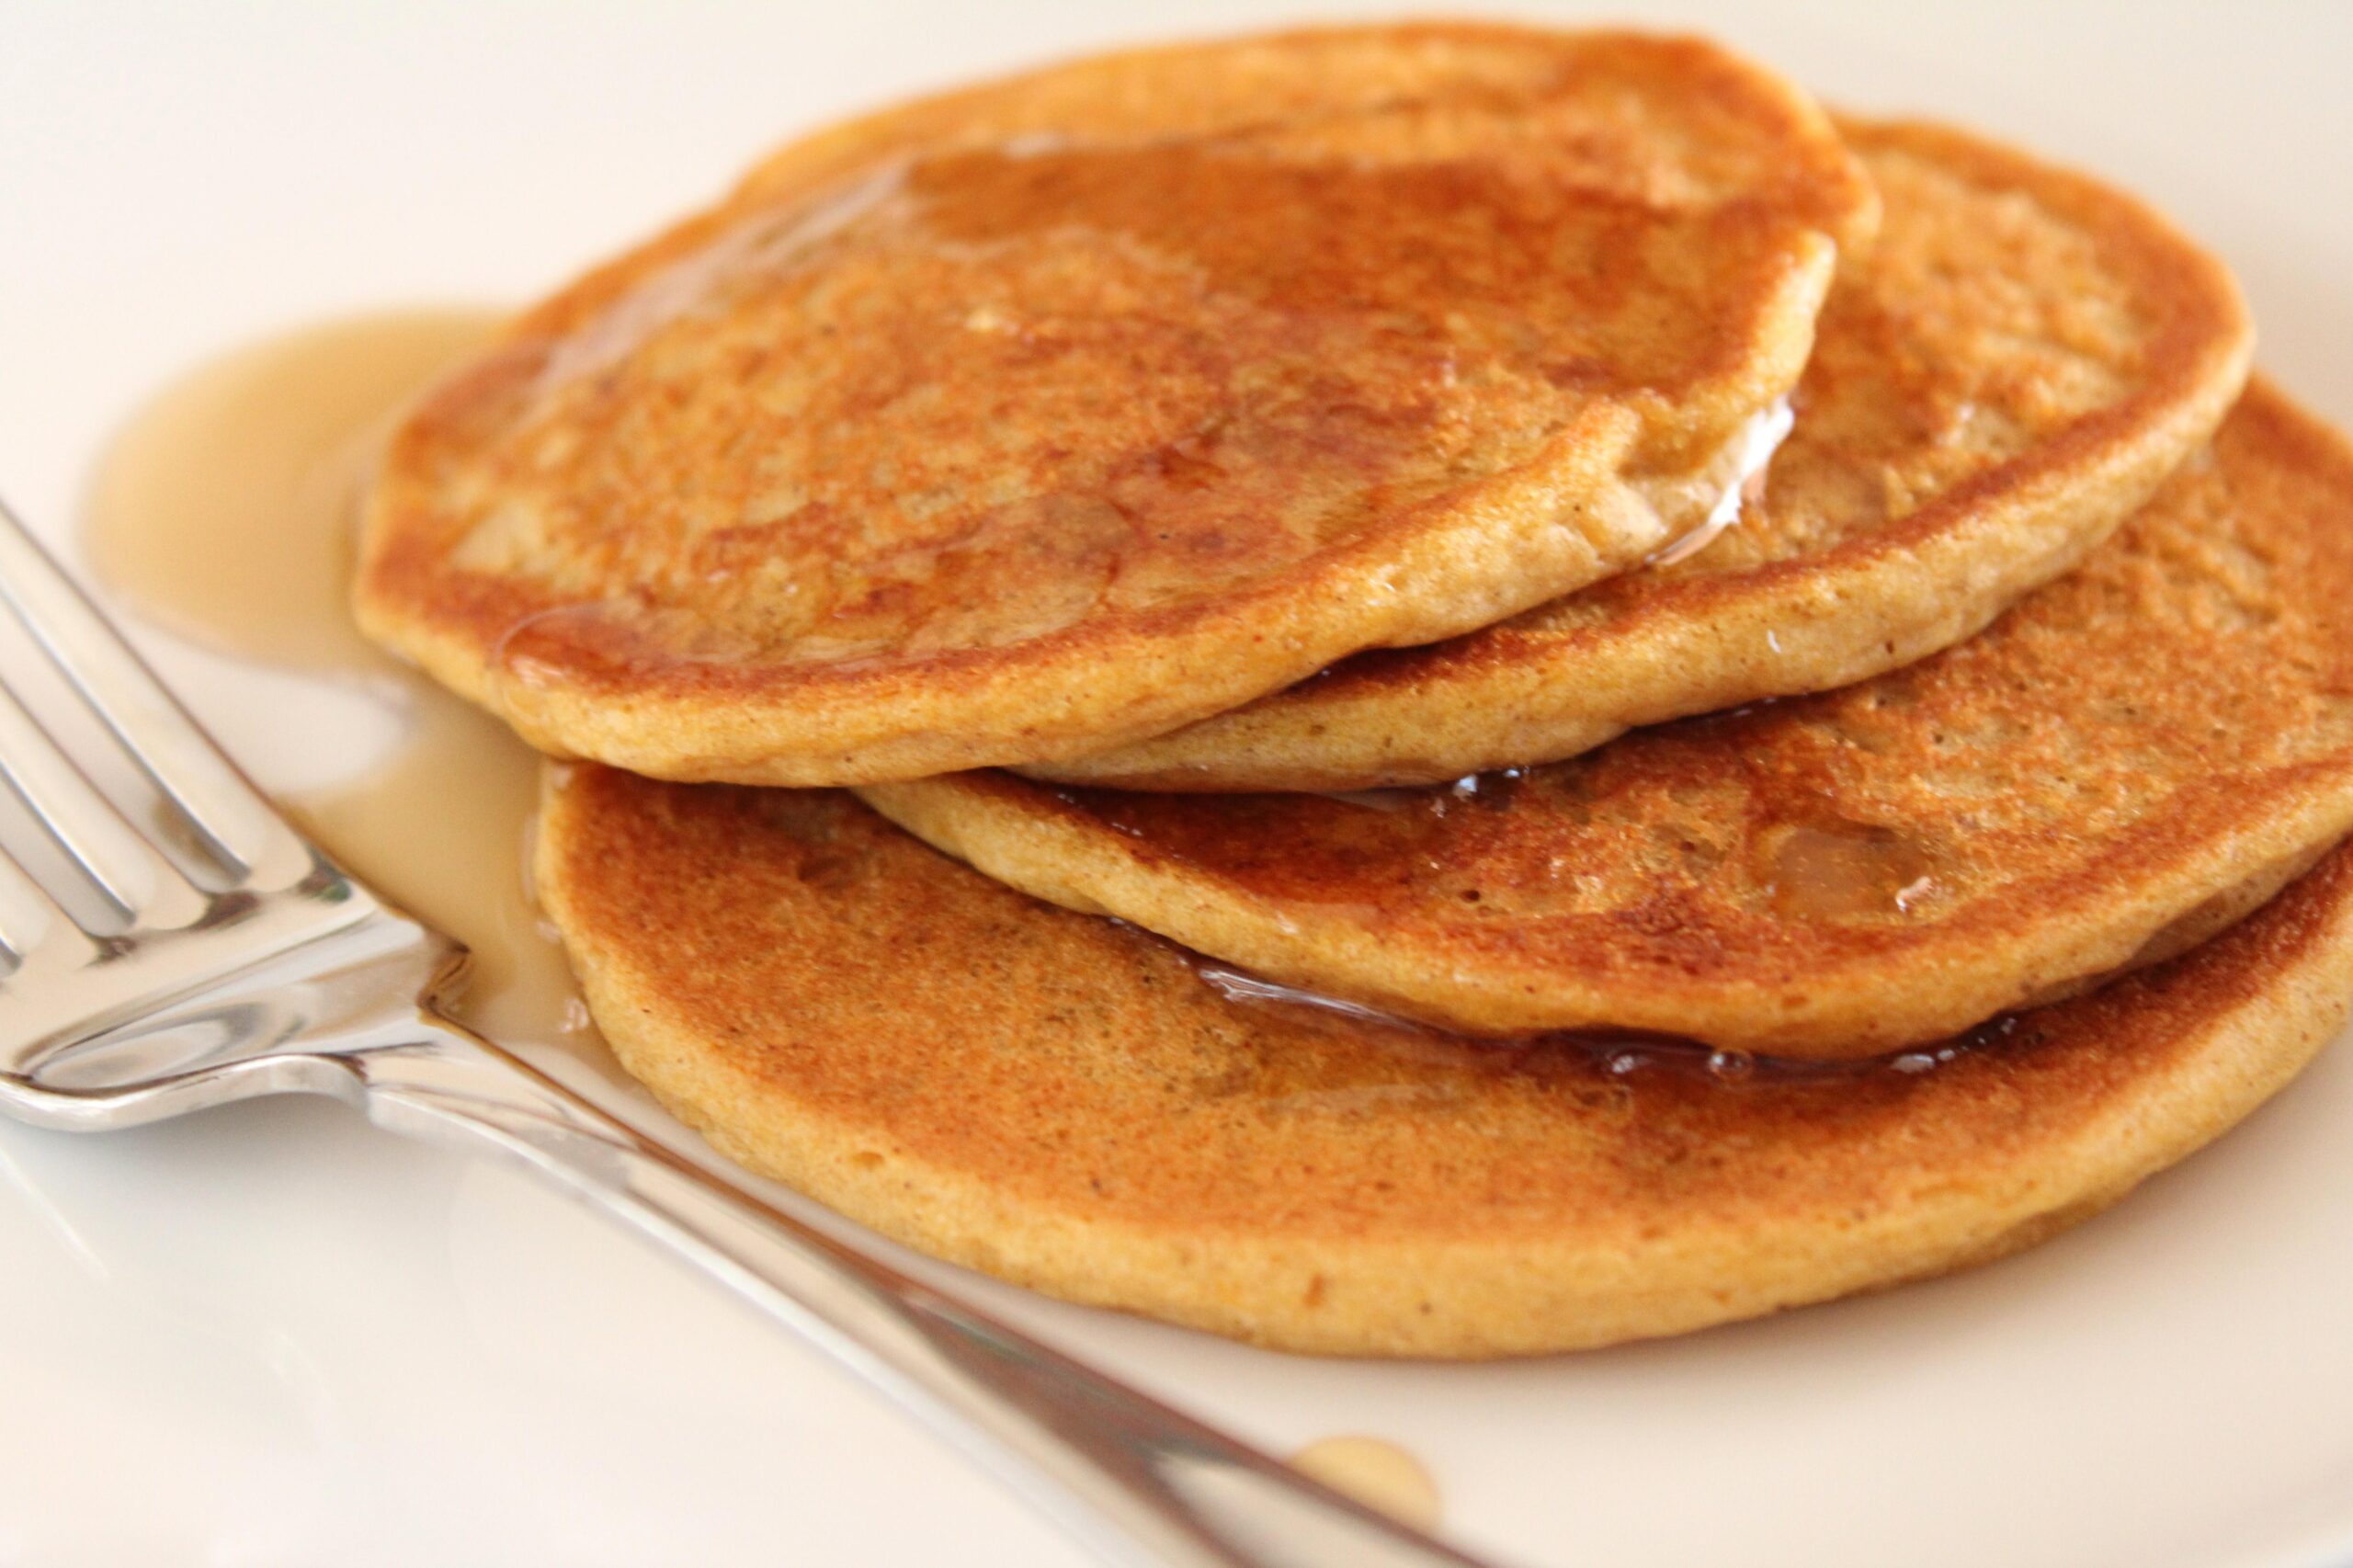  Say goodbye to boring pancakes and hello to a stack of these pumpkin-filled beauties